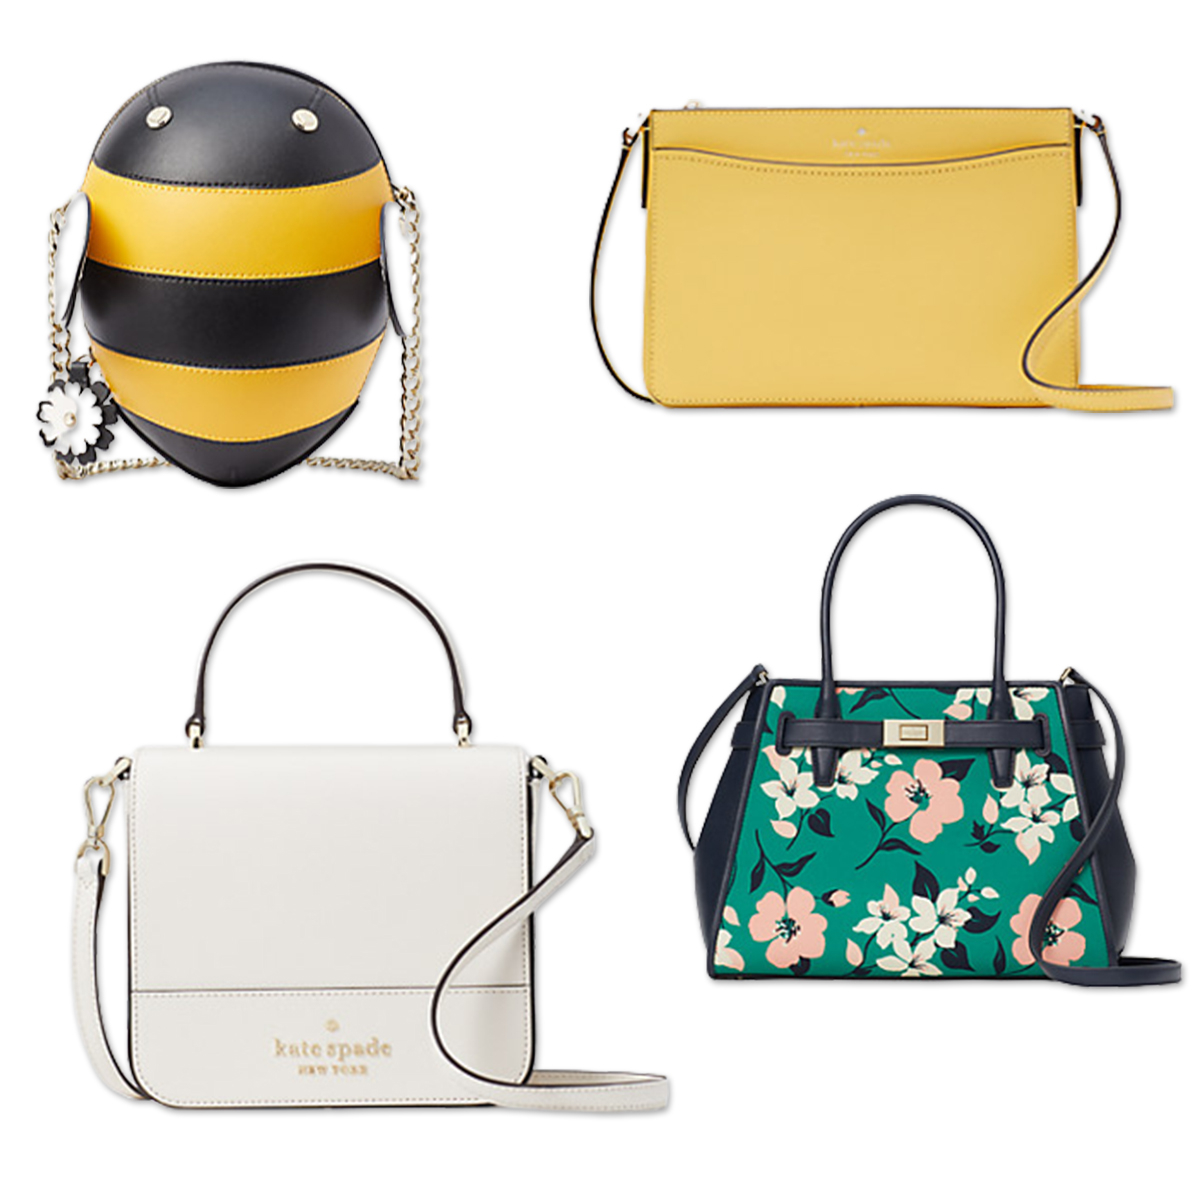 Kate Spade Surprise has handbags, shoes, clothing deals up to 75